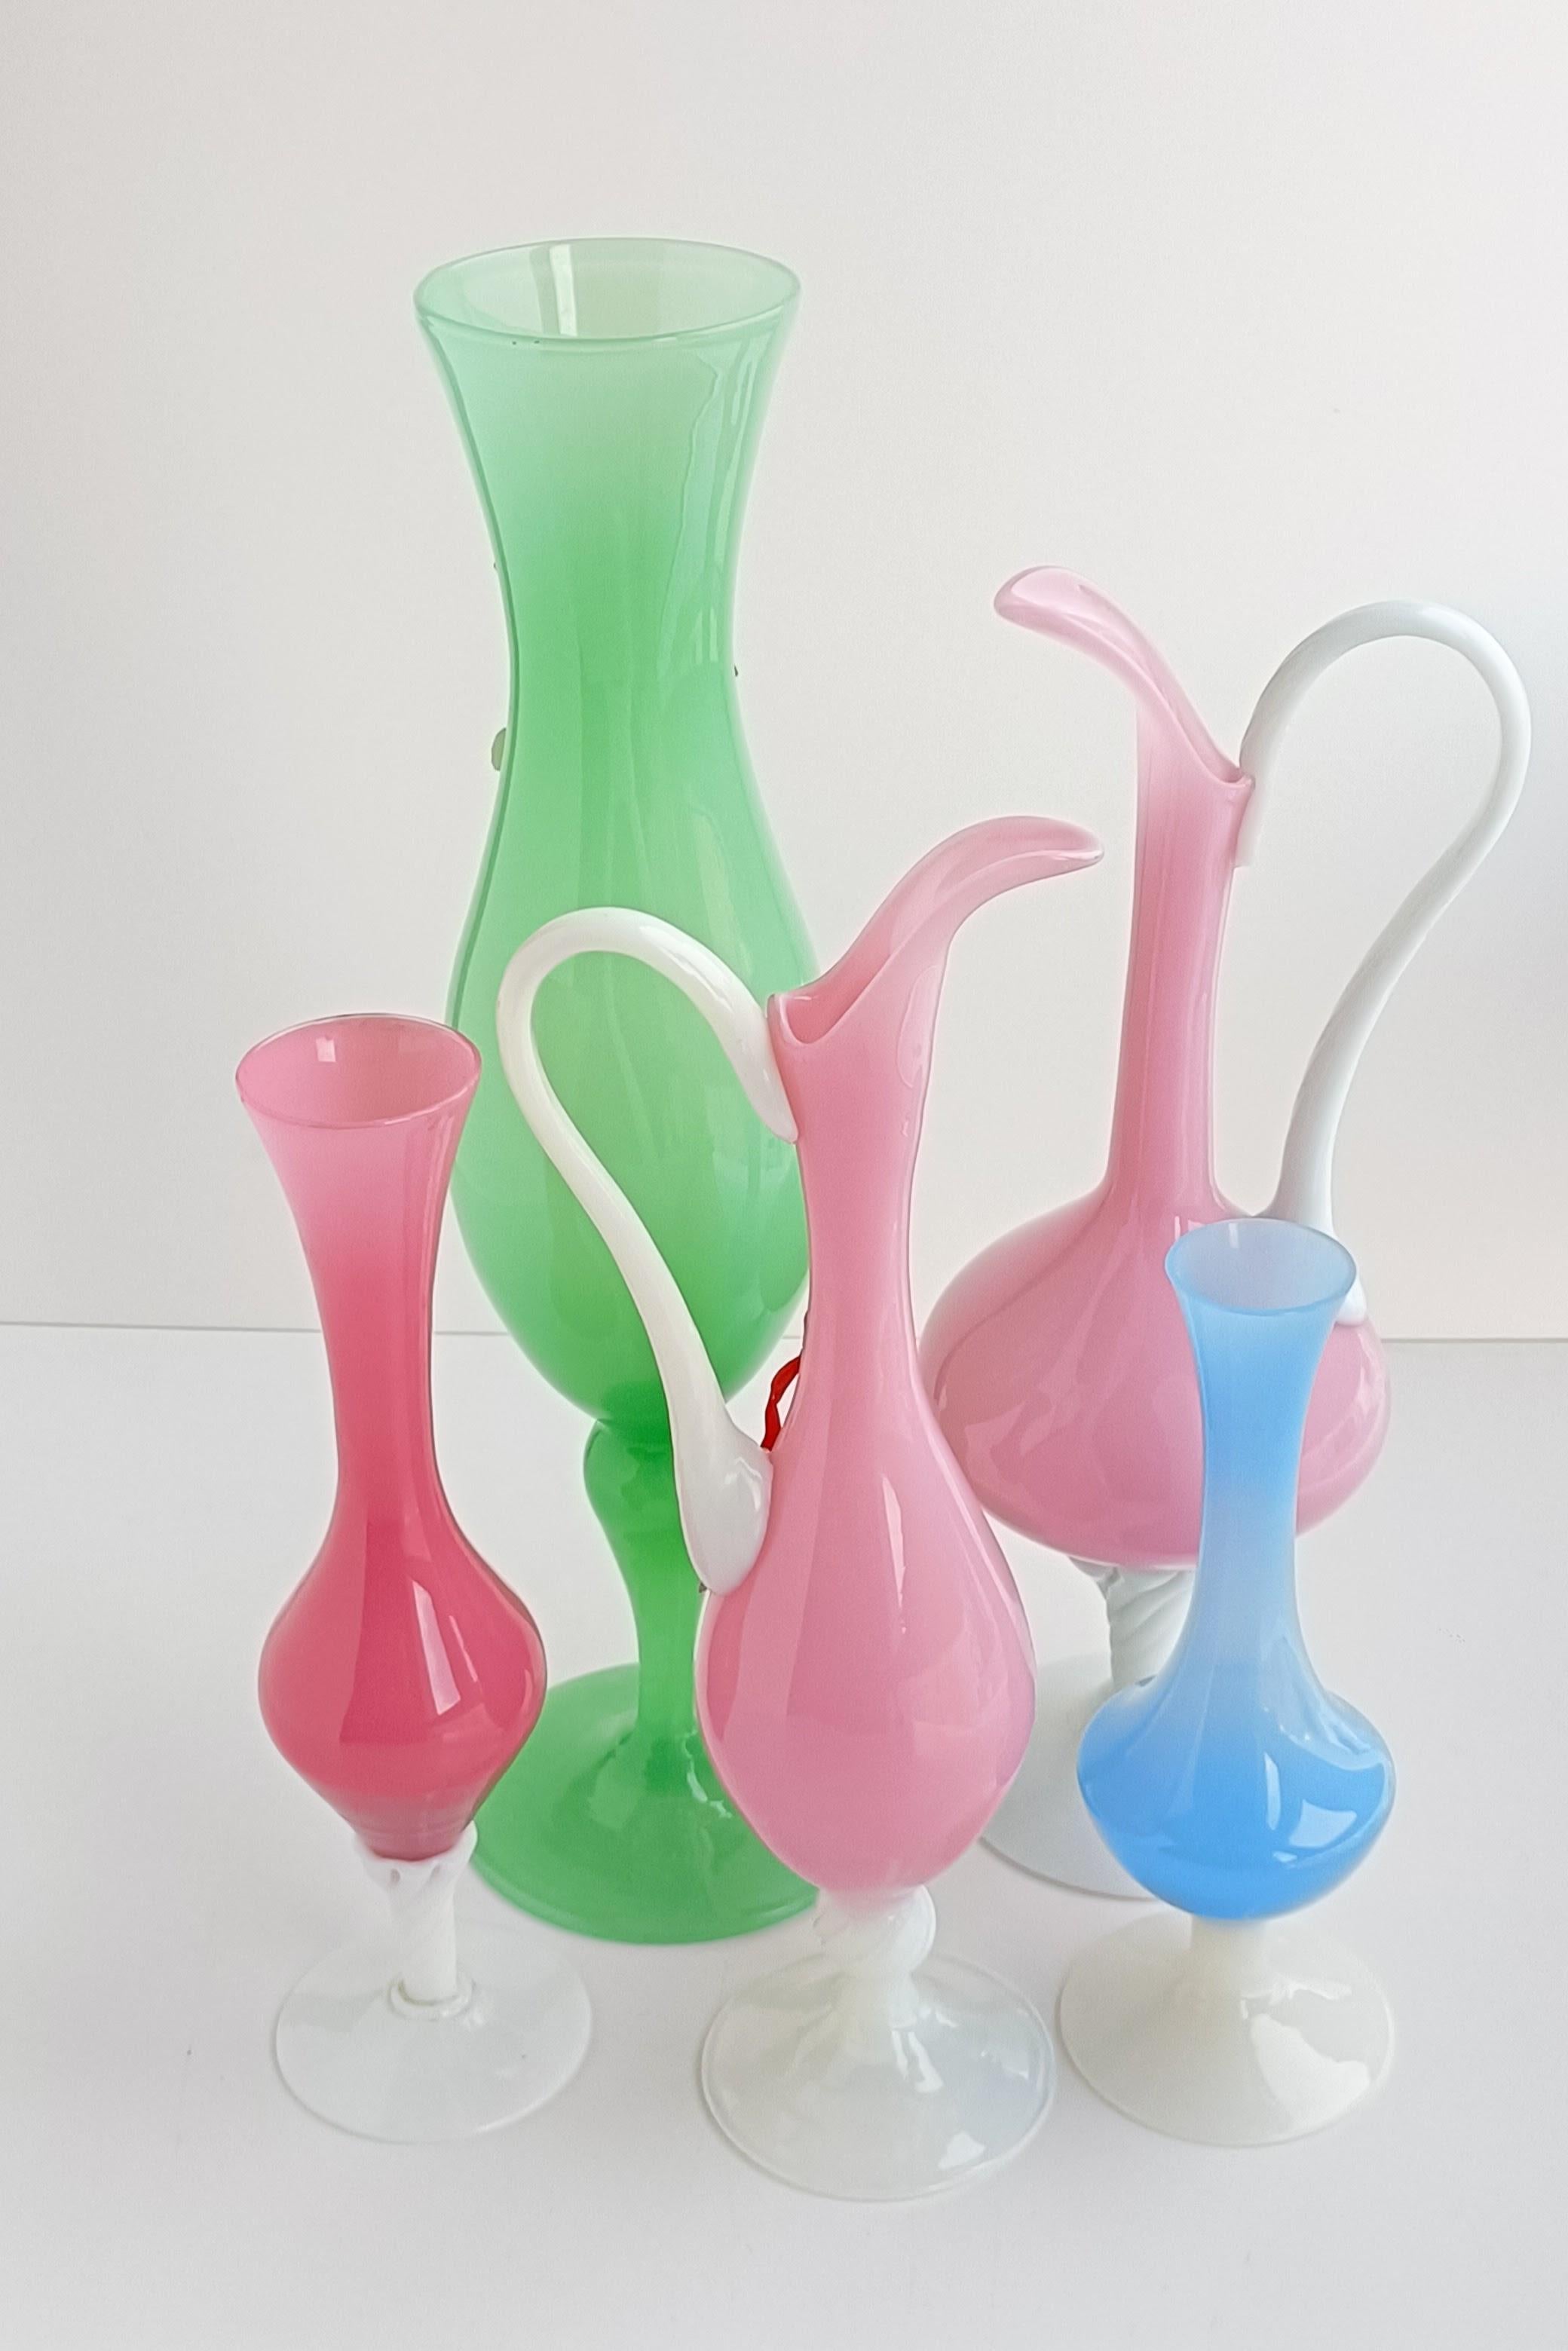 Blown Glass Empoli Glass Opaline Florence Set of Vases, Italy, 1950s.  For Sale